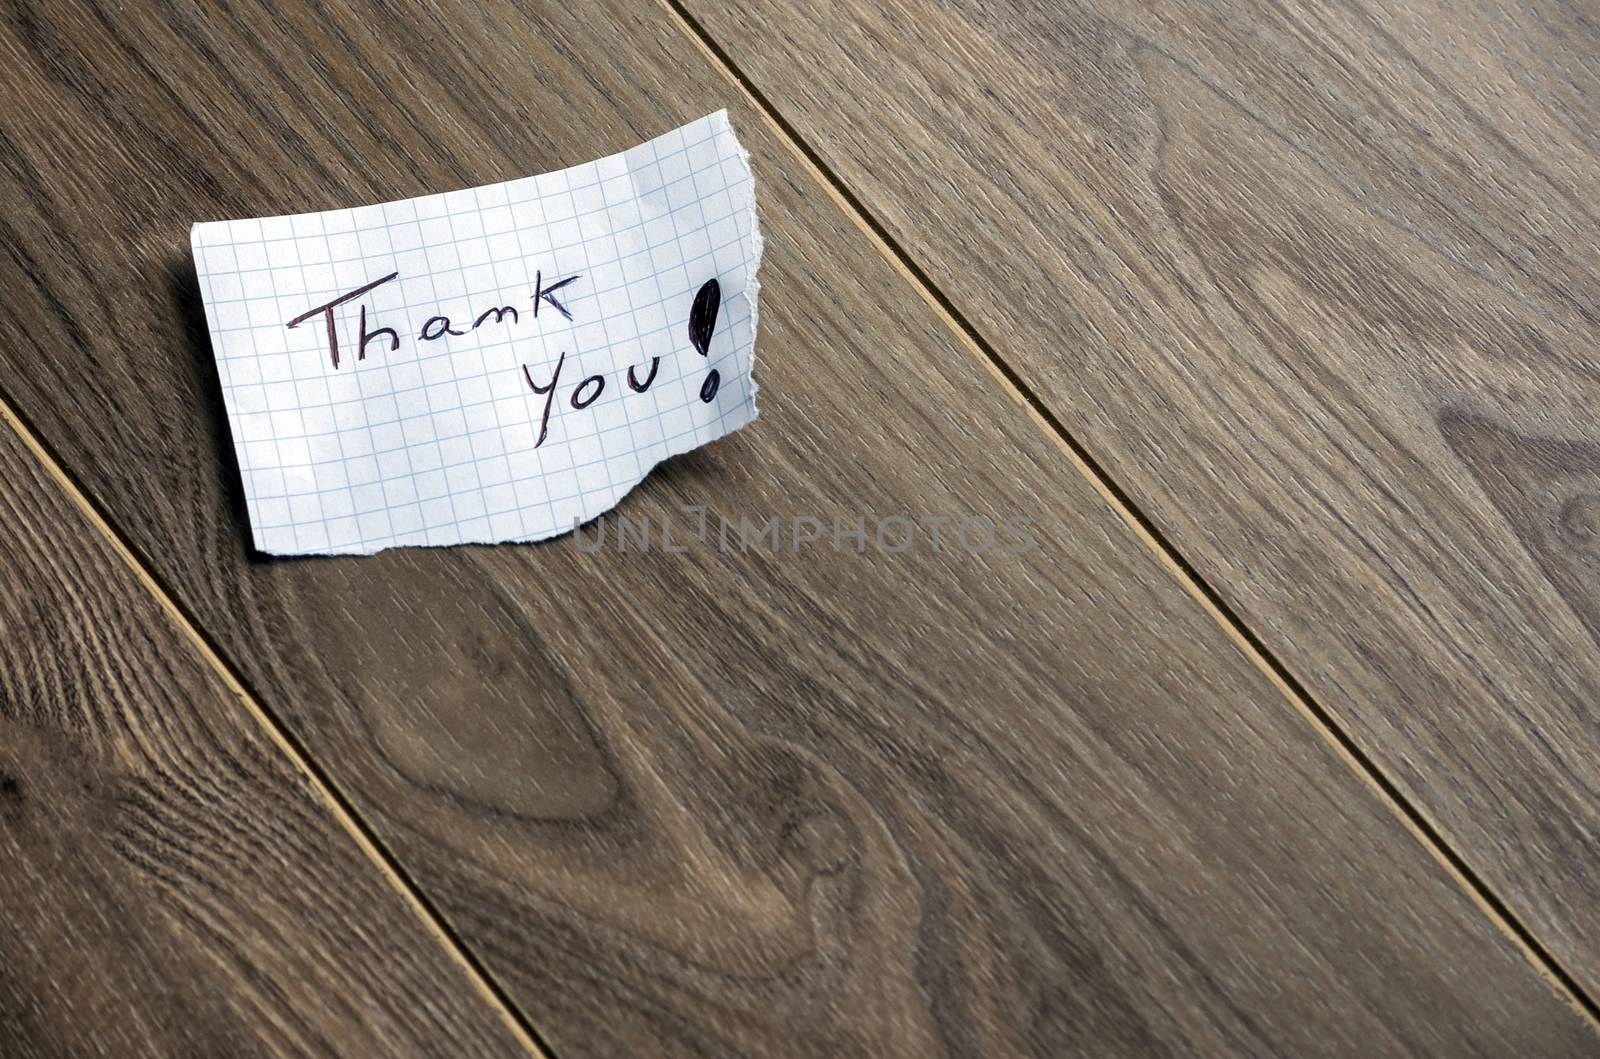 Thank you - Hand writing text on wood background with space for text